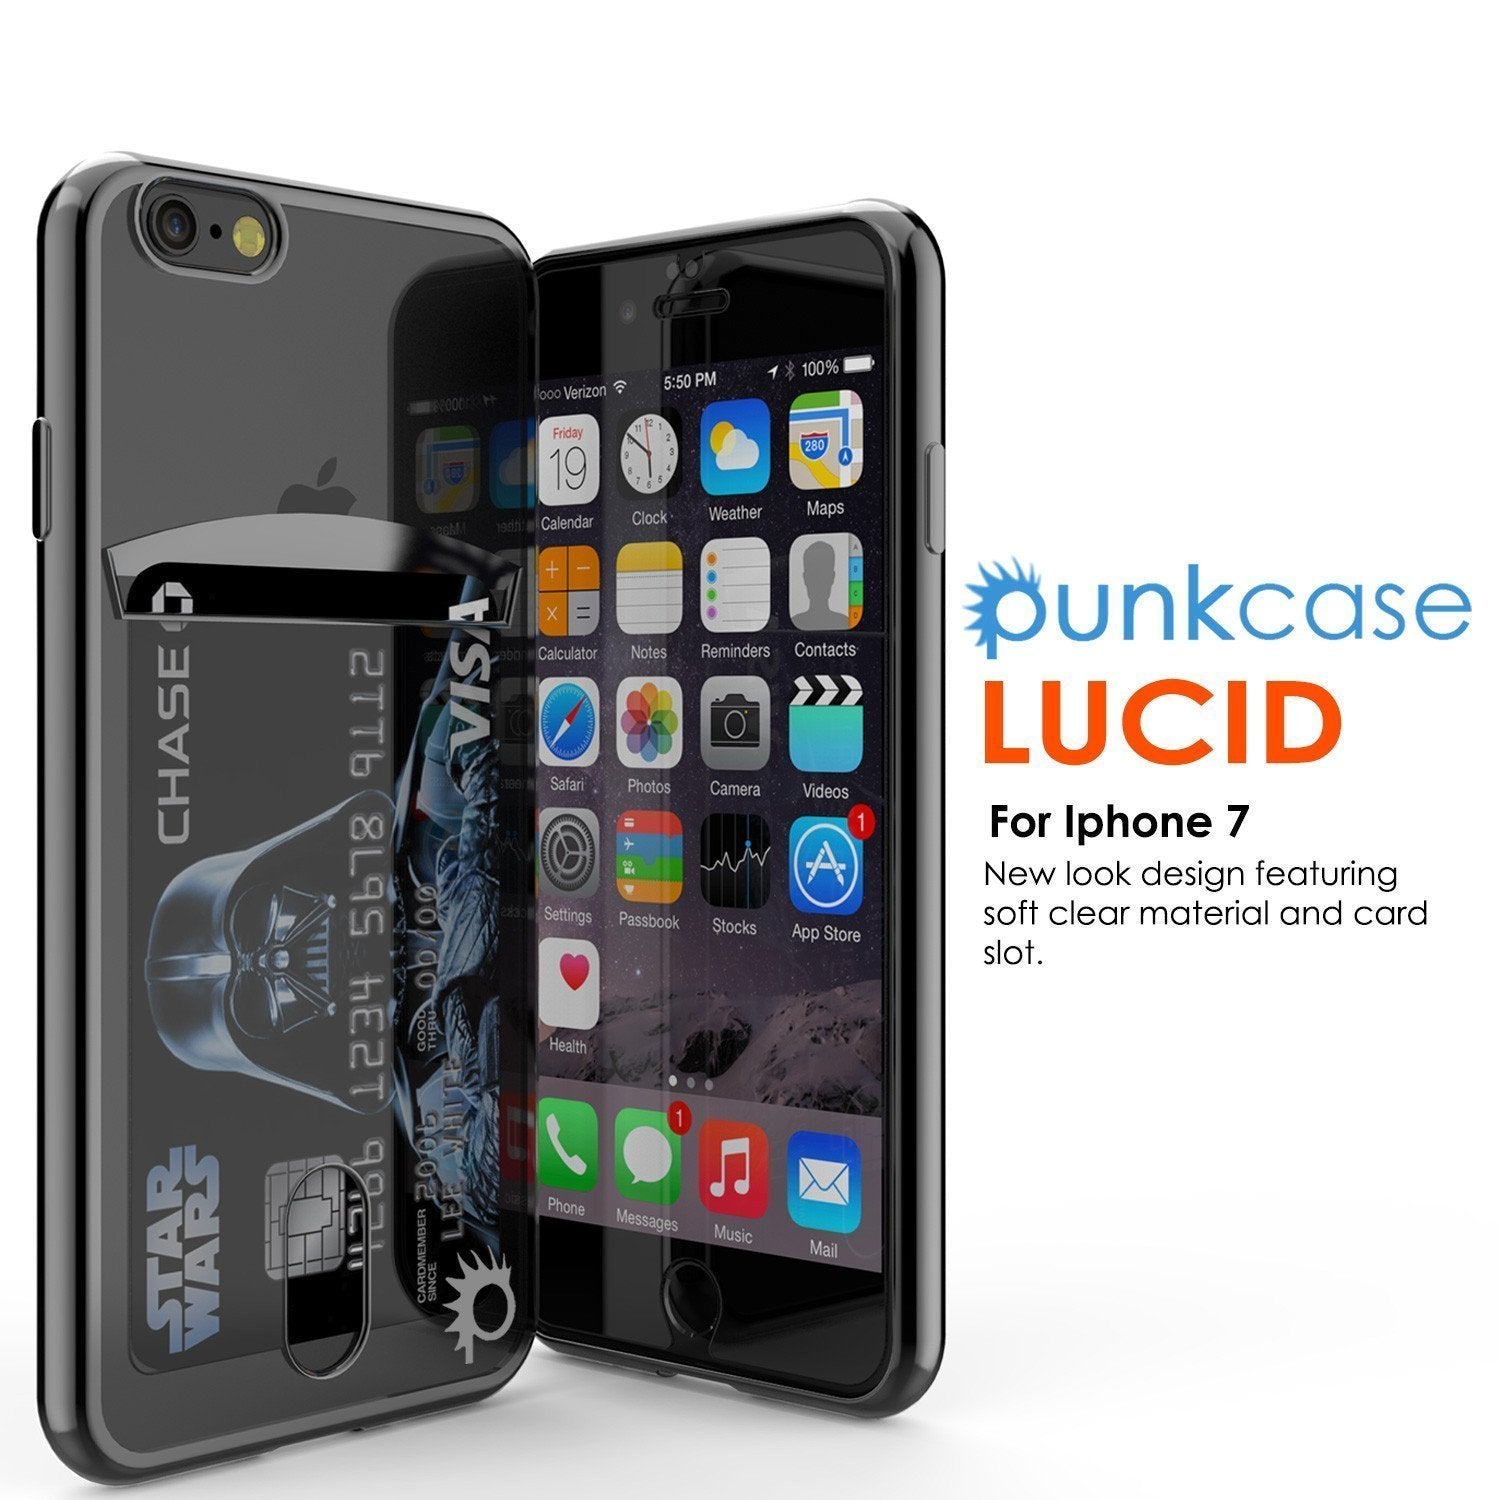 iPhone SE (4.7") Case, PUNKCASE® LUCID Black Series | Card Slot | SHIELD Screen Protector | Ultra fit